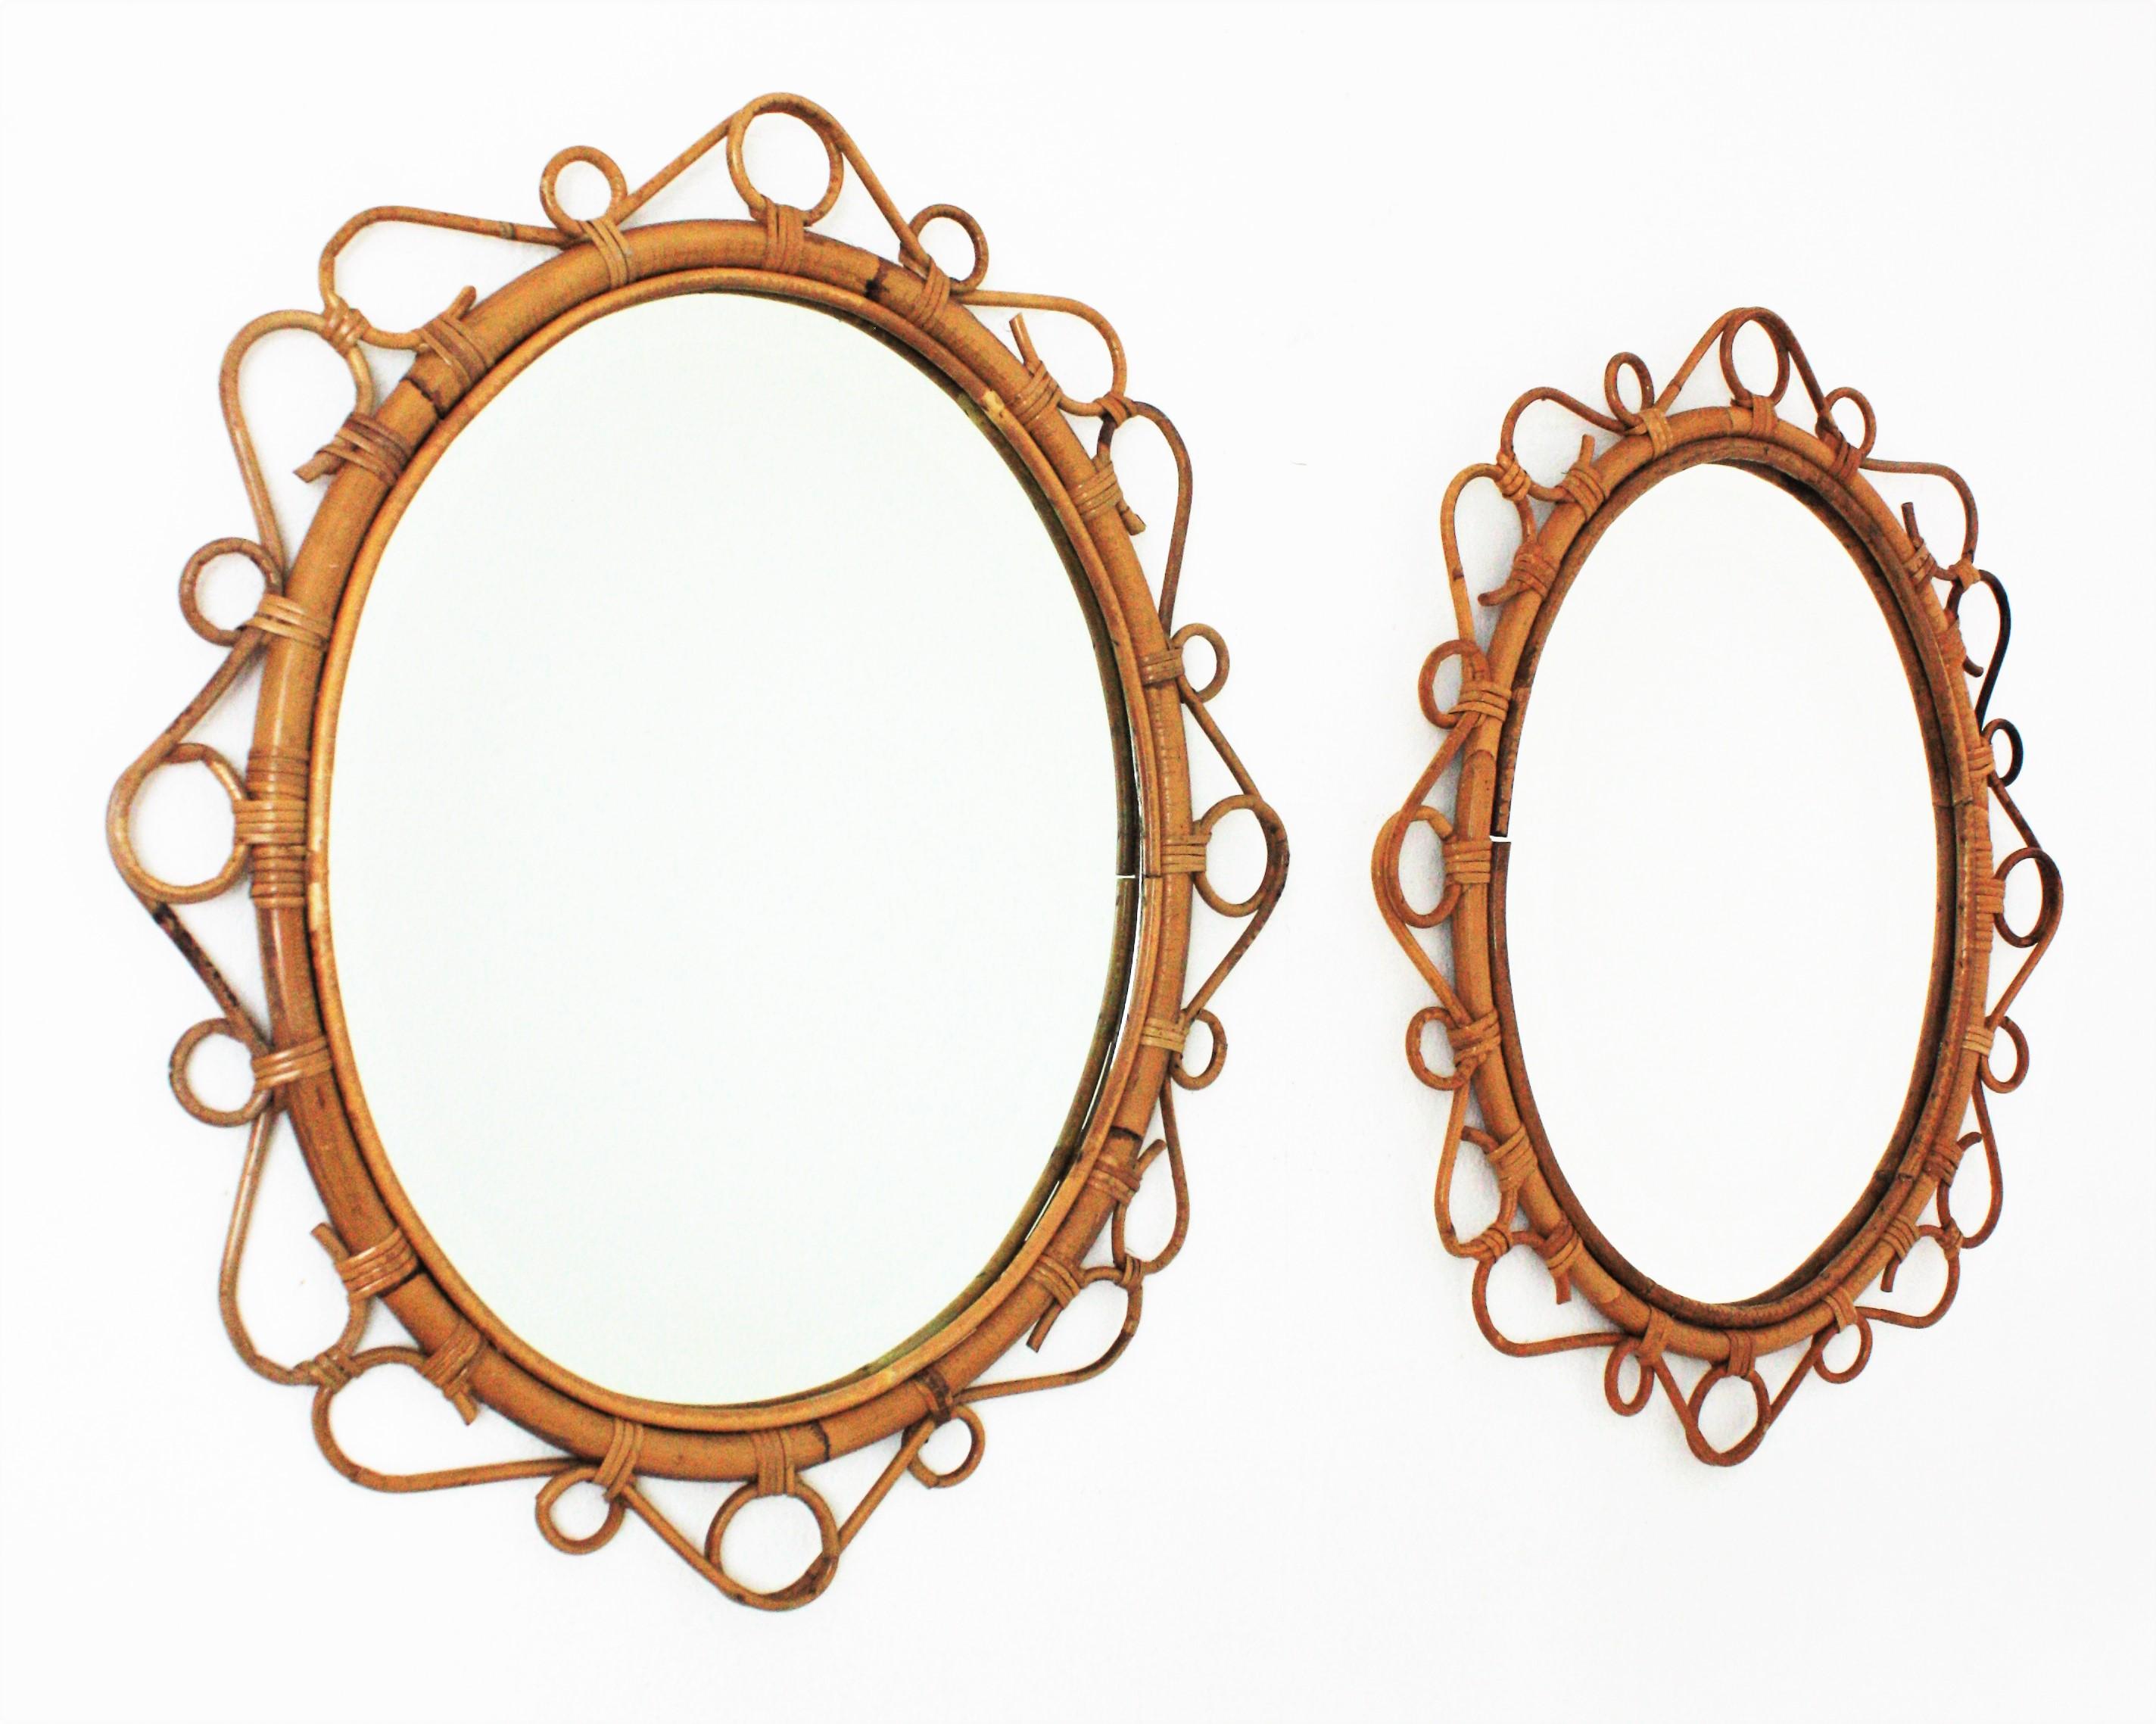 A pair of eye-catching handcrafted bamboo and rattan oval mirrors with scroll detailing surrounding the frame. Spain, circa 1960s.
These Mediterranean wall mirrors feature an oval bamboo frame surrounded by rattan scroll and circle